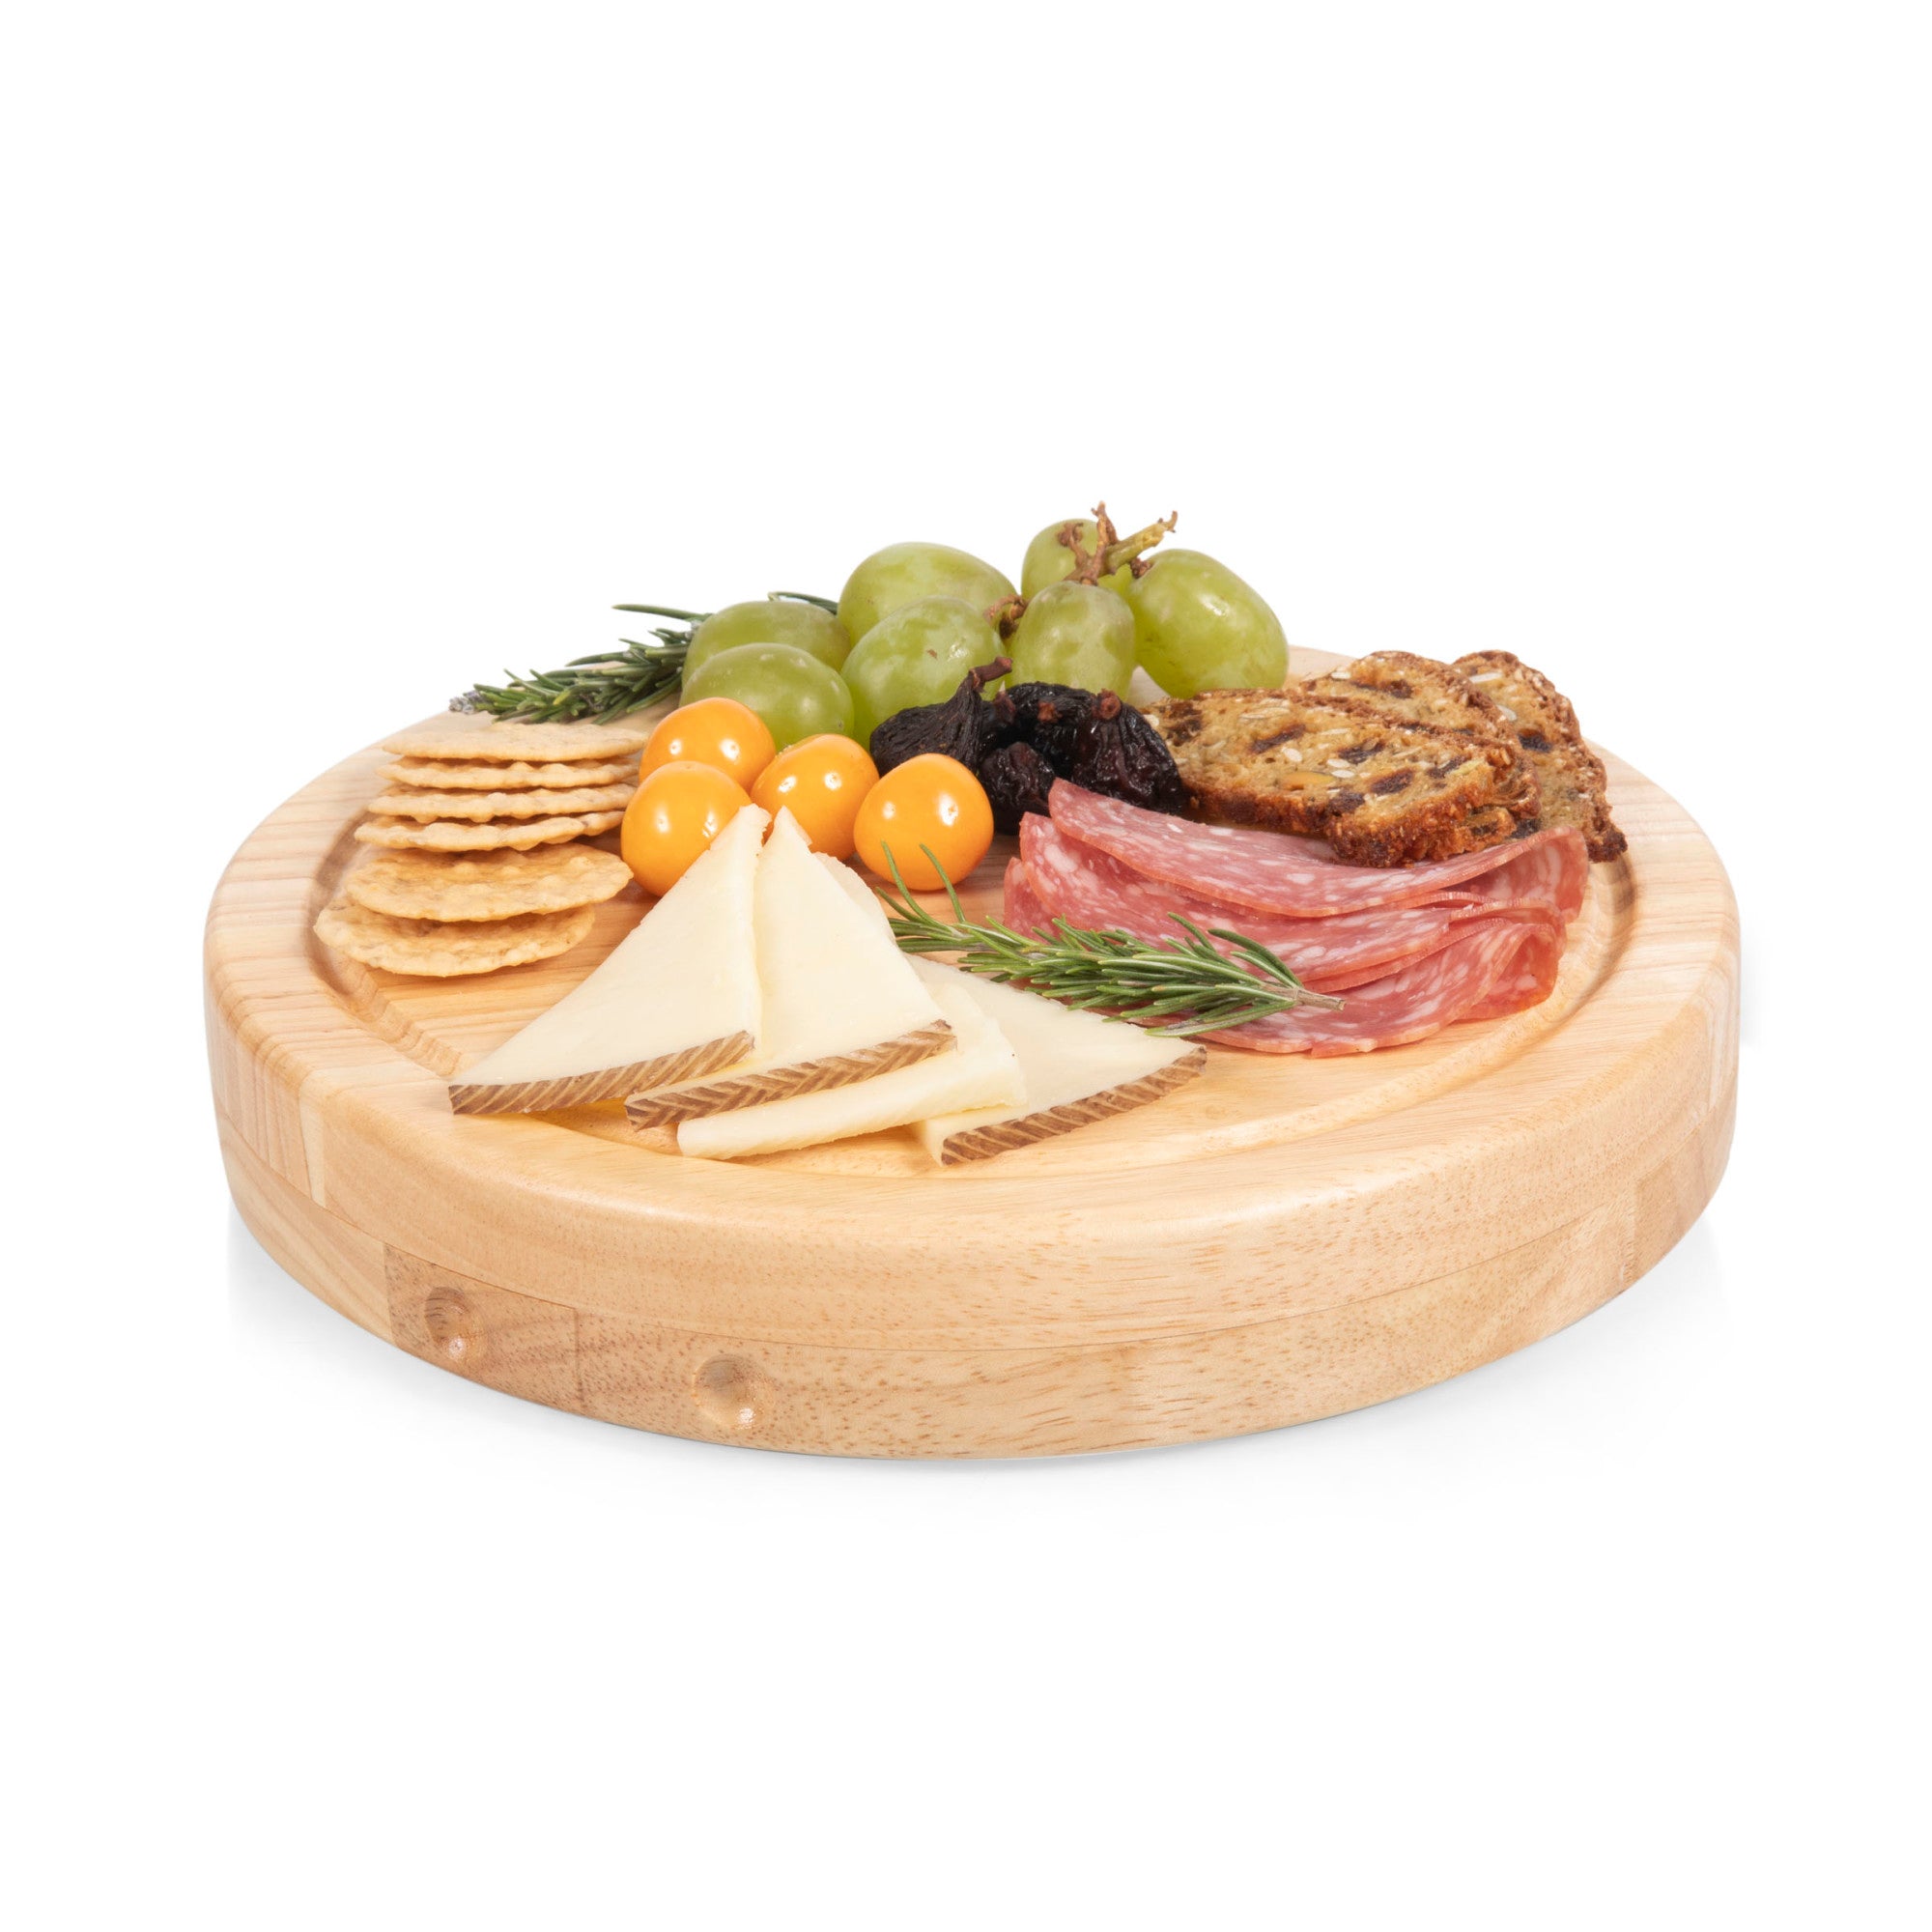 Lord of the Rings The One Ring - Circo Cheese Cutting Board & Tools Set